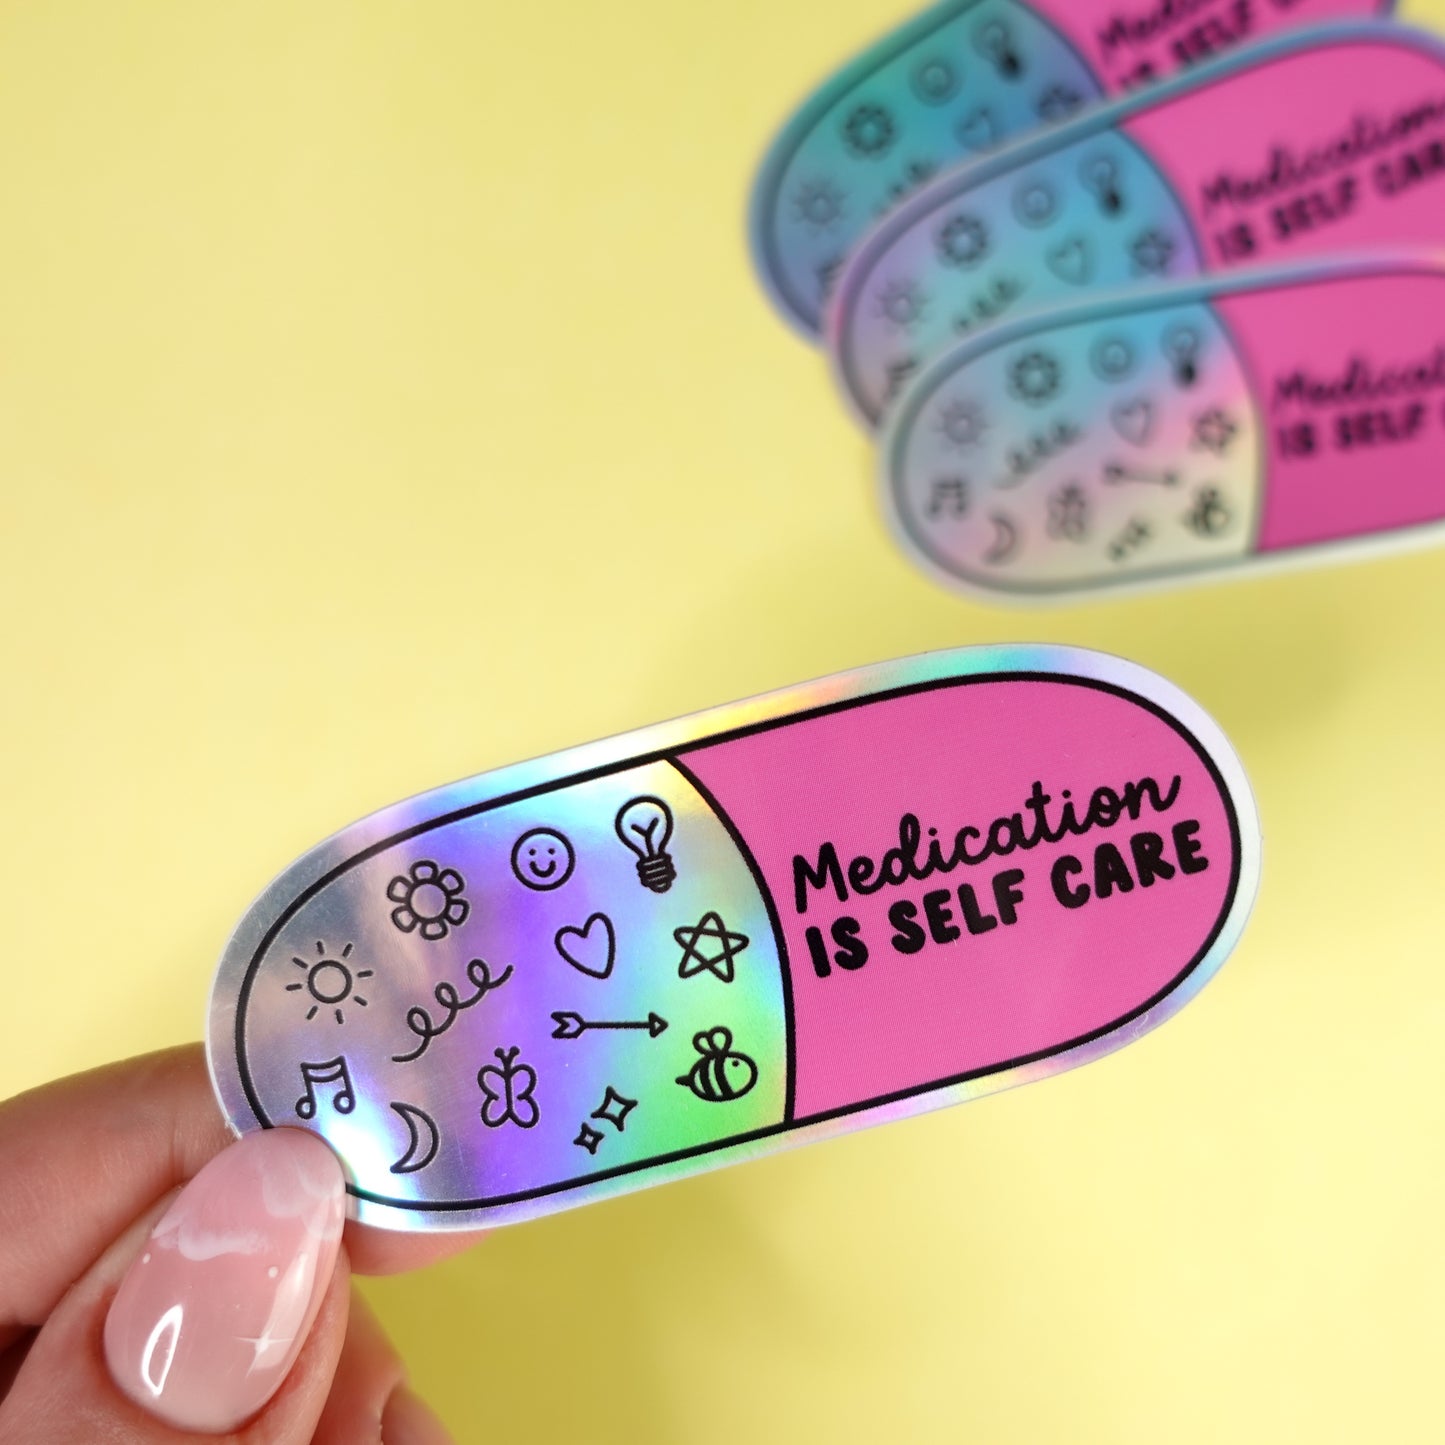 Medication is Self-Care Holographic Sticker